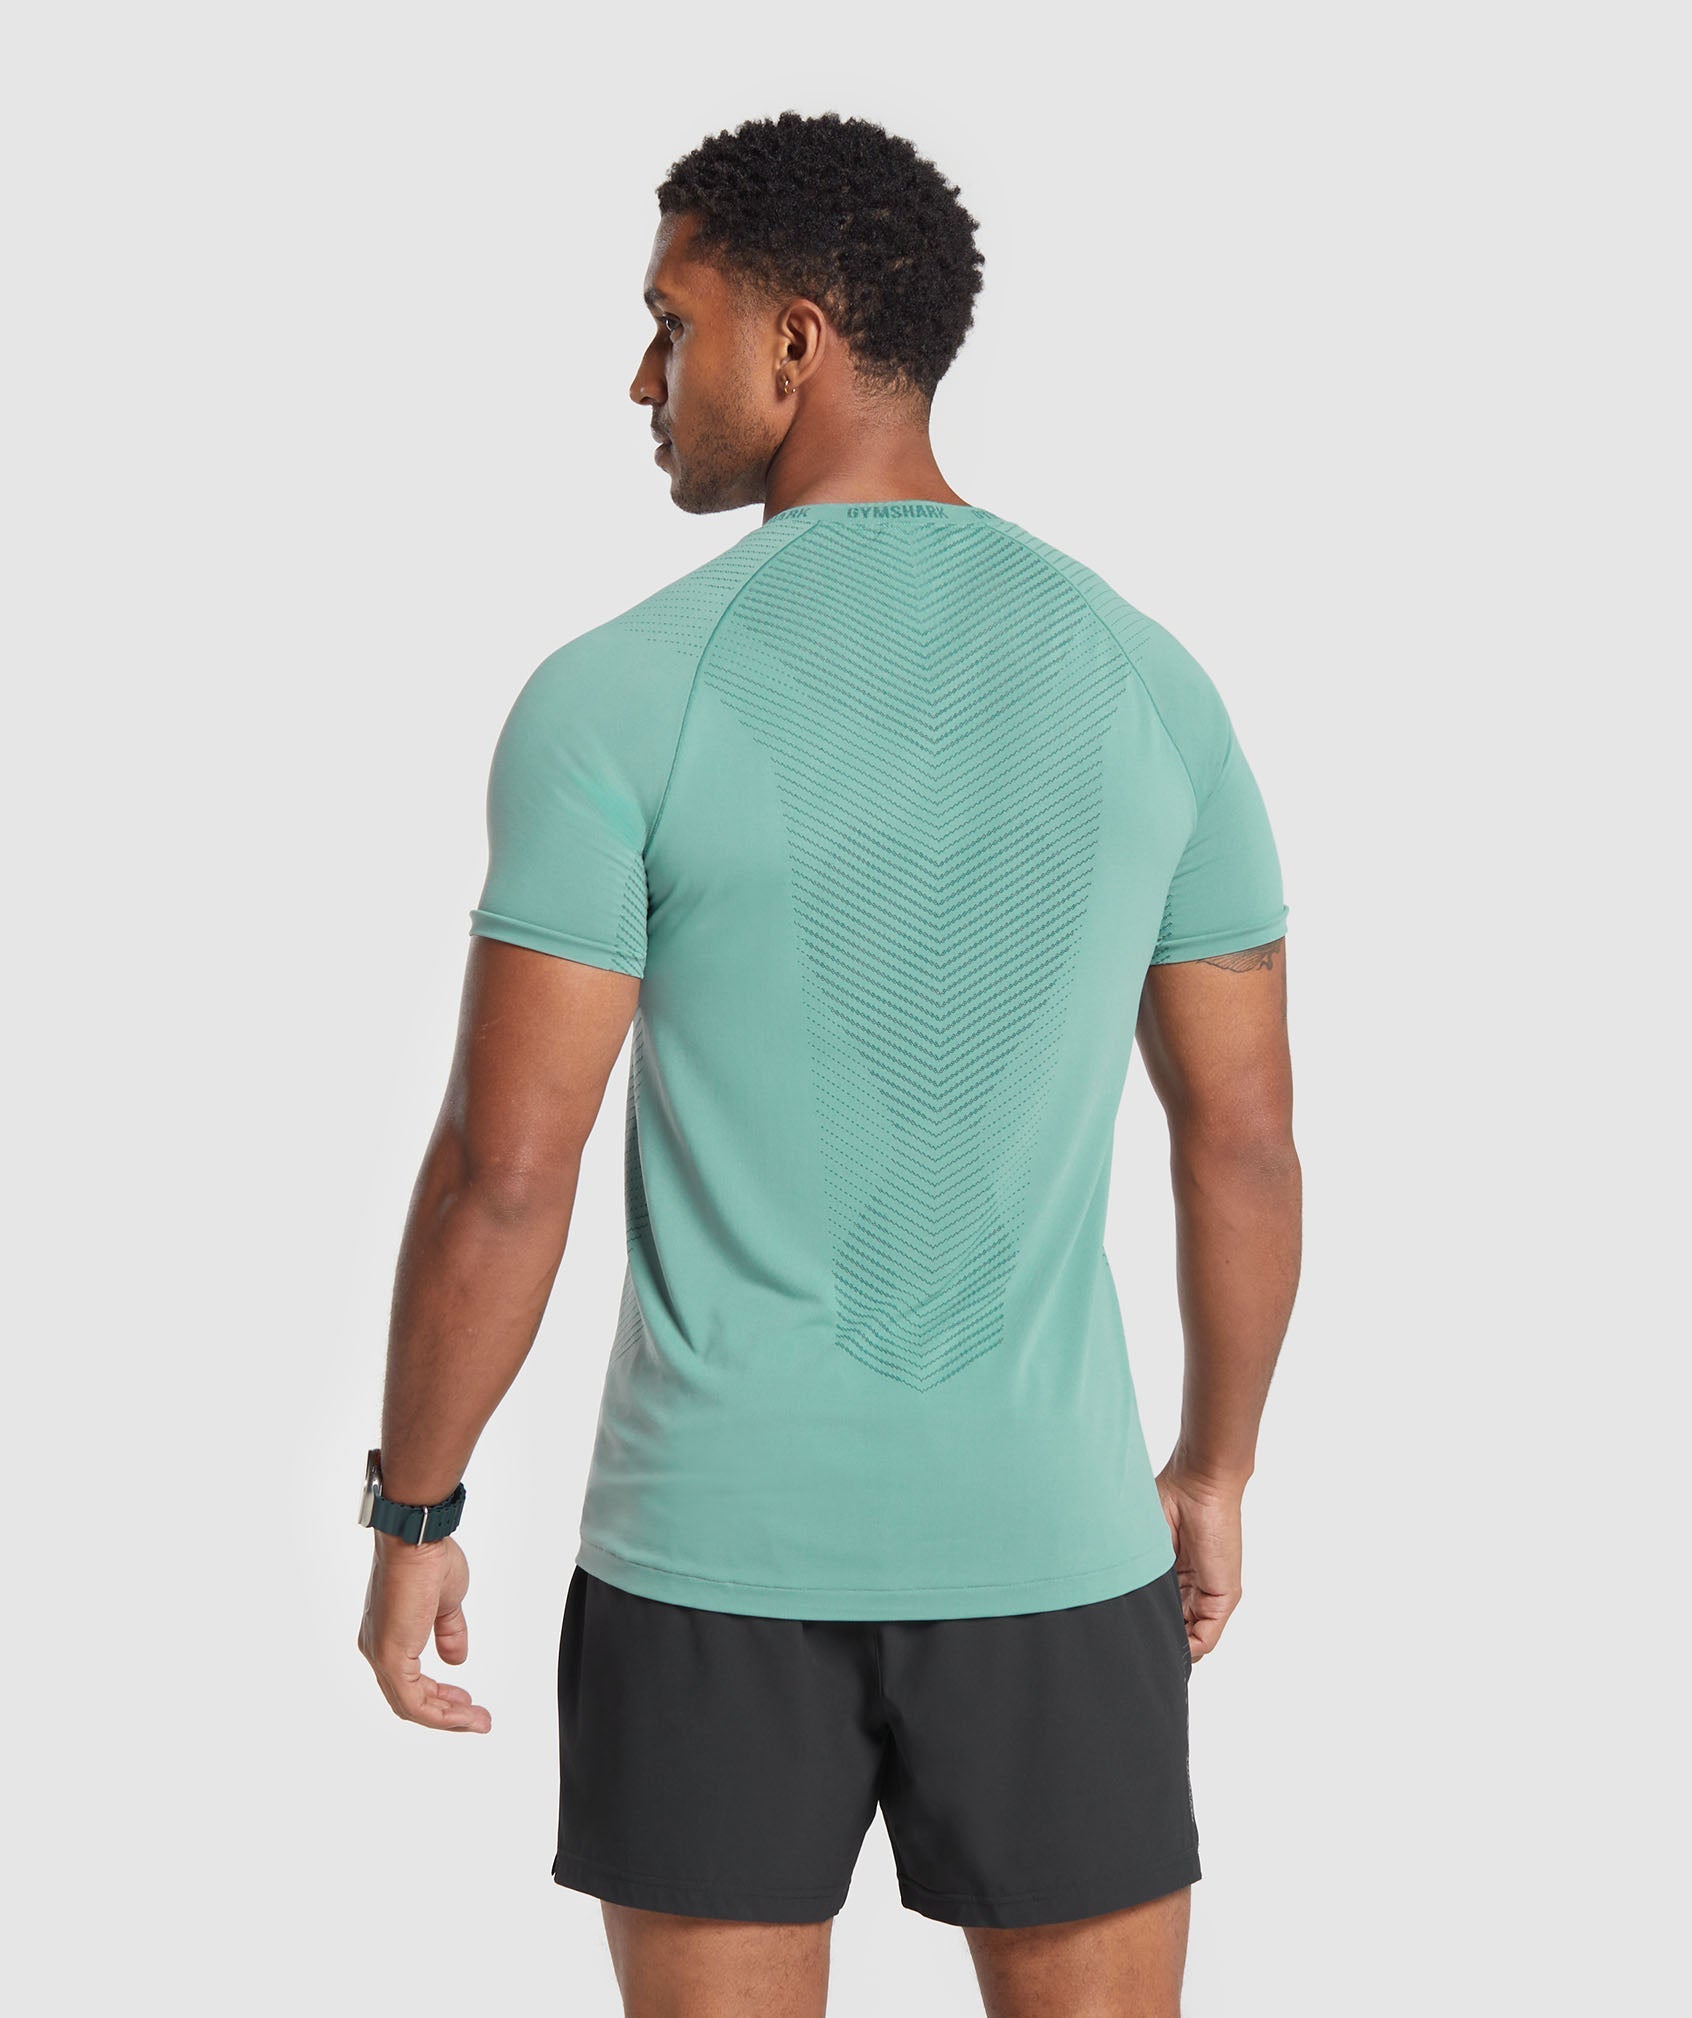 Apex Seamless T-Shirt in Duck Egg Blue/Smokey Teal - view 2